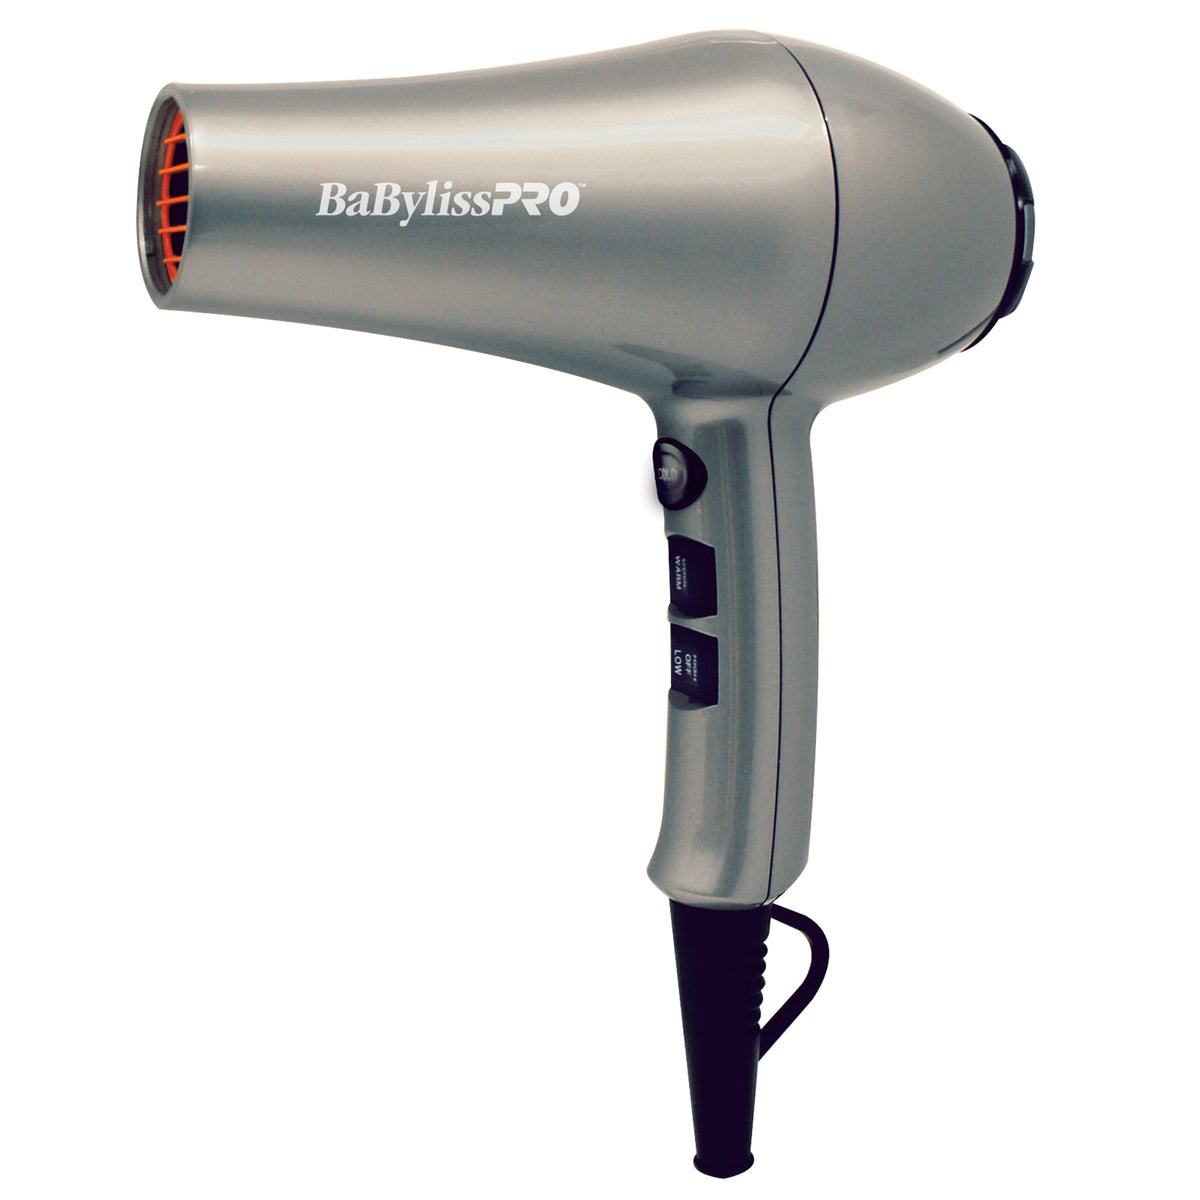 BaBylissPRO Ionic and Ceramic Hairdryer